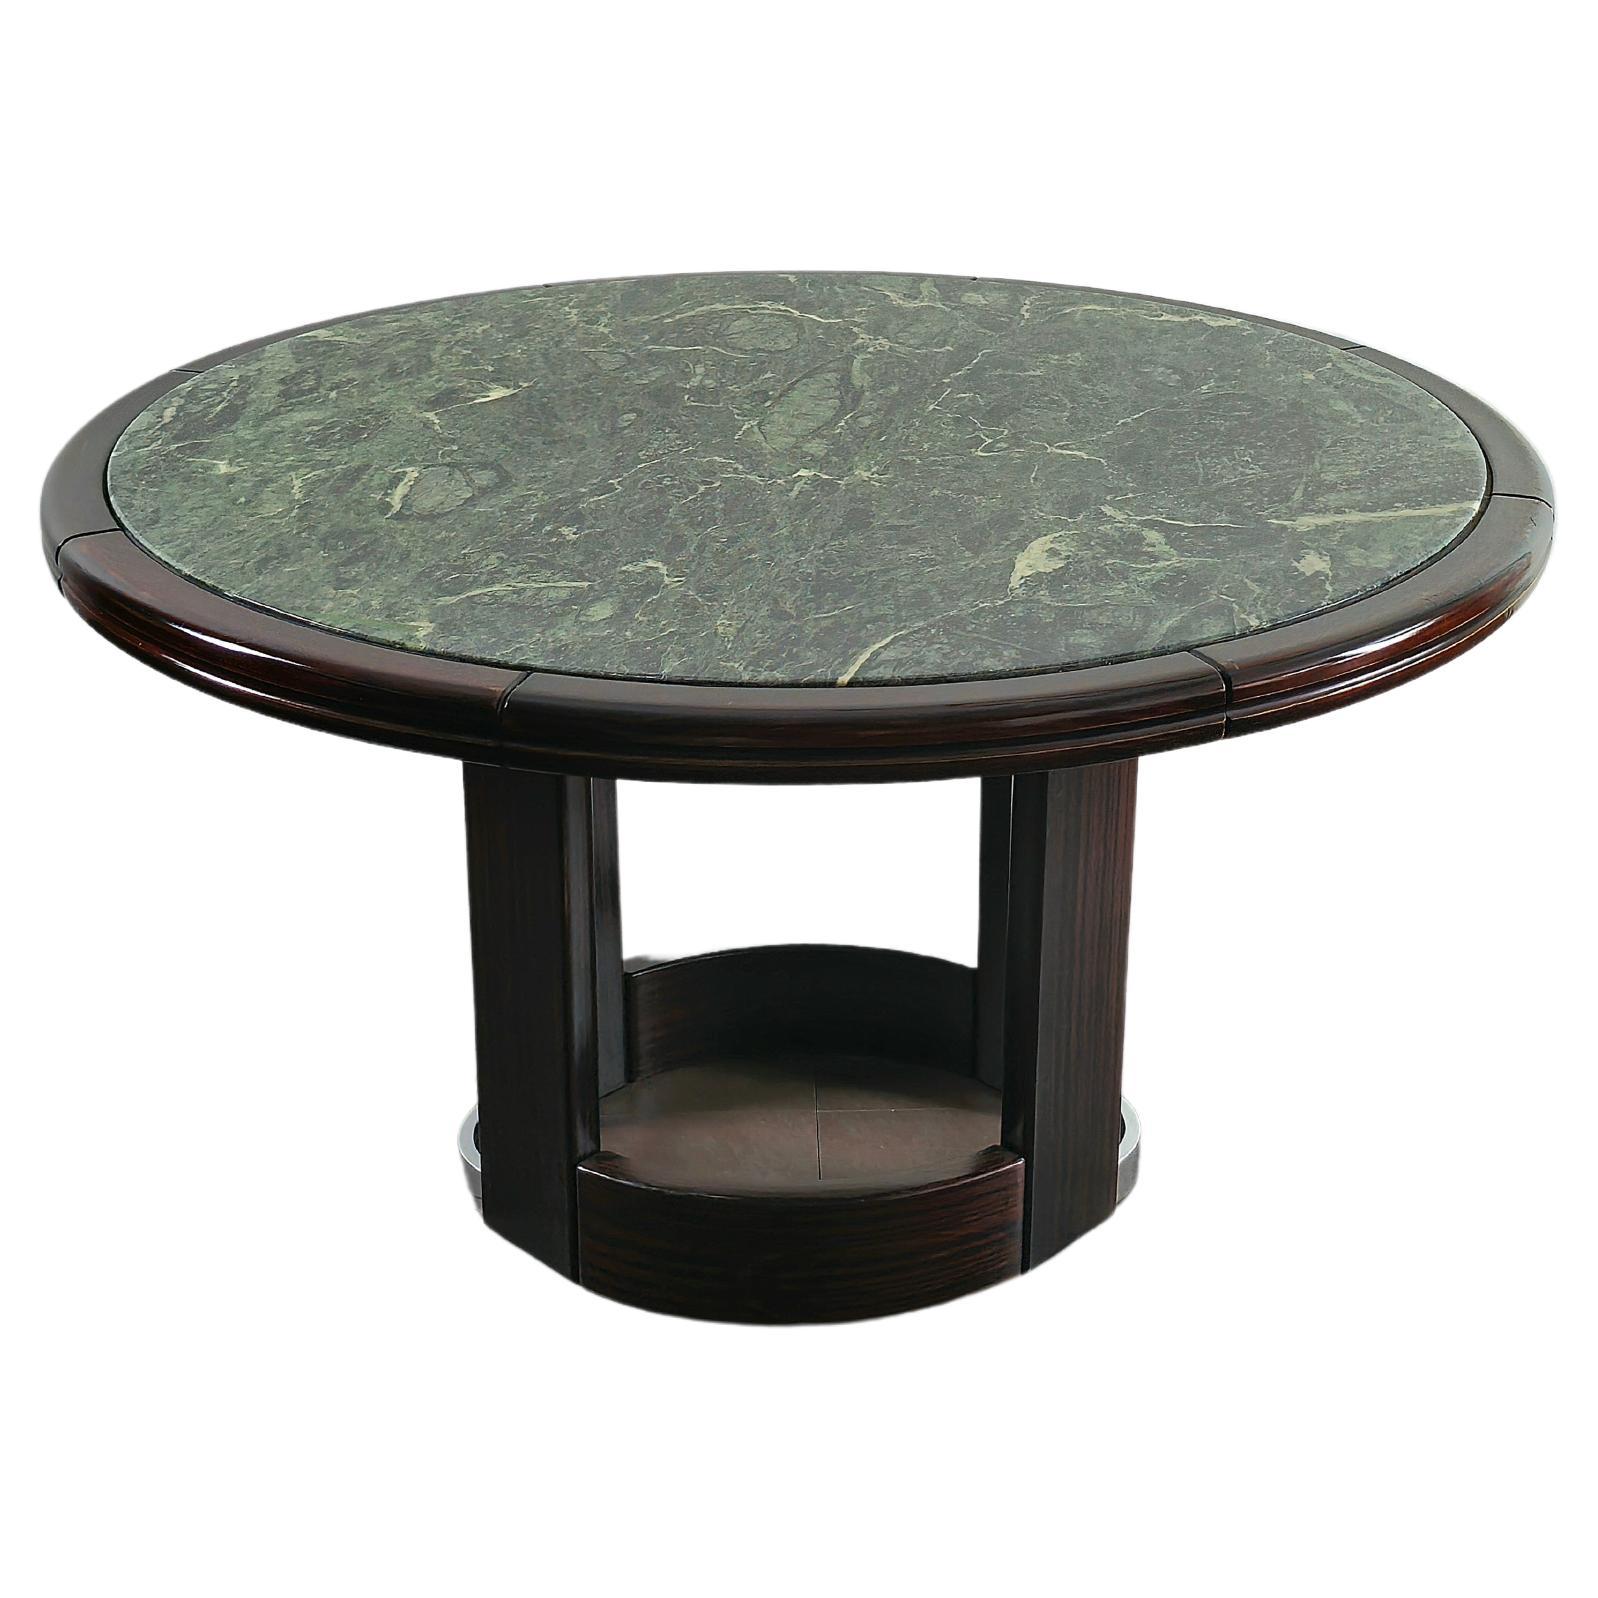 Tables at Auction